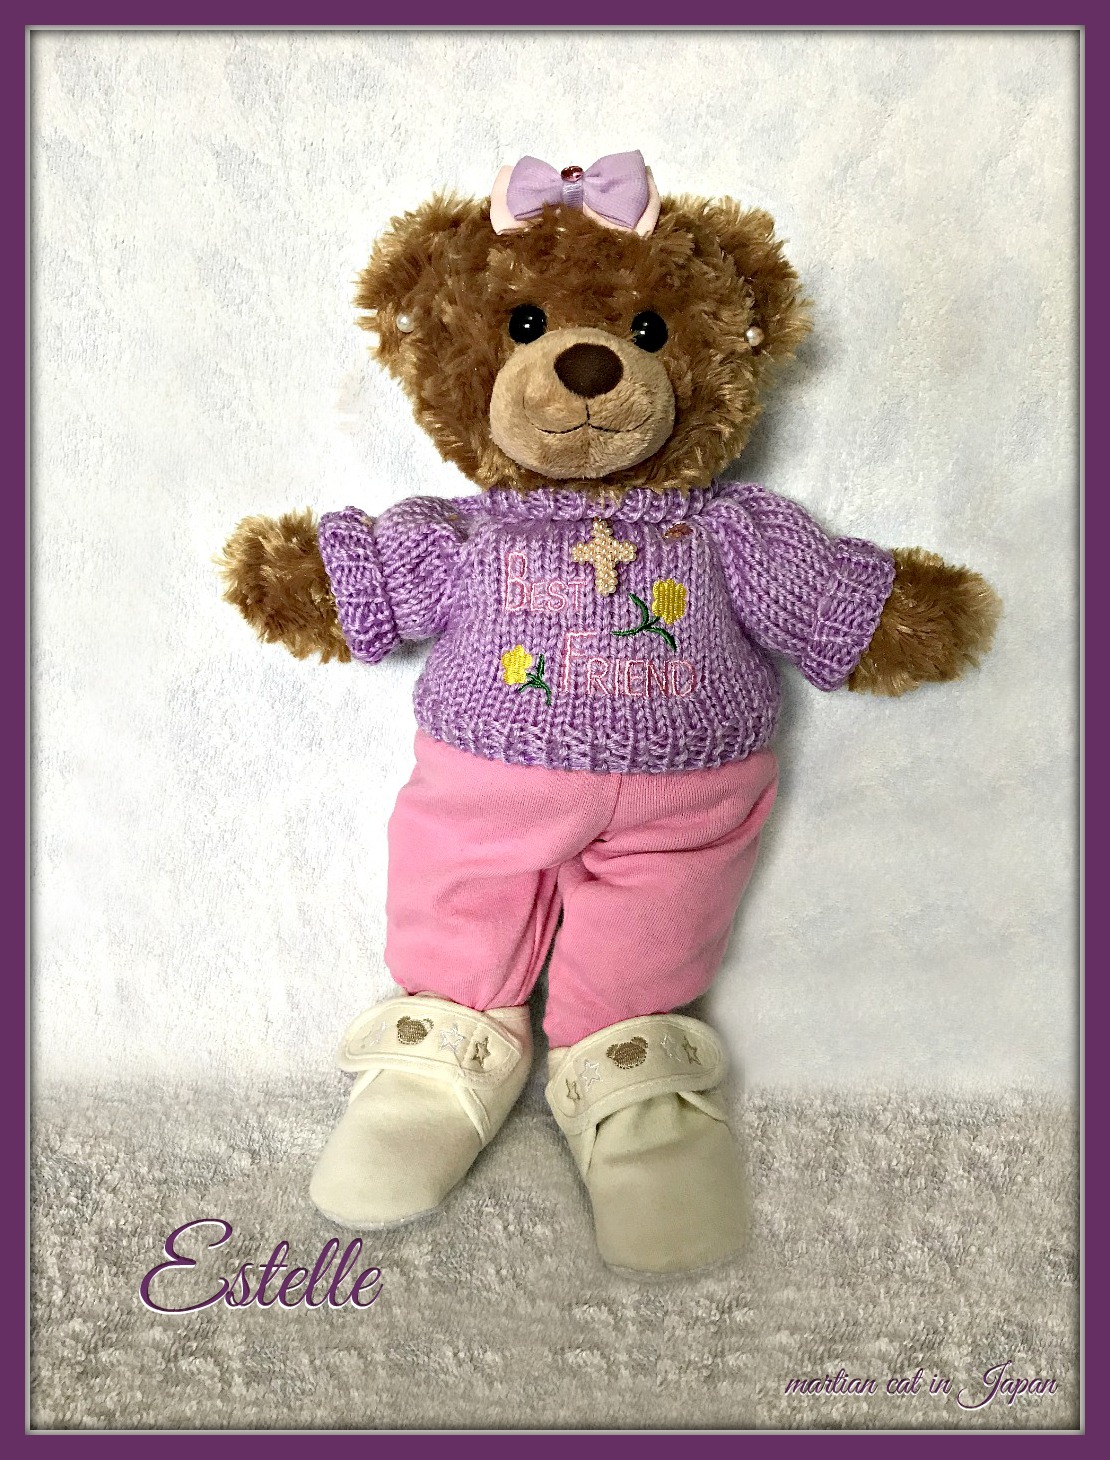 "Introducing my teddy bear whose name is Estelle. And, her name means Star."